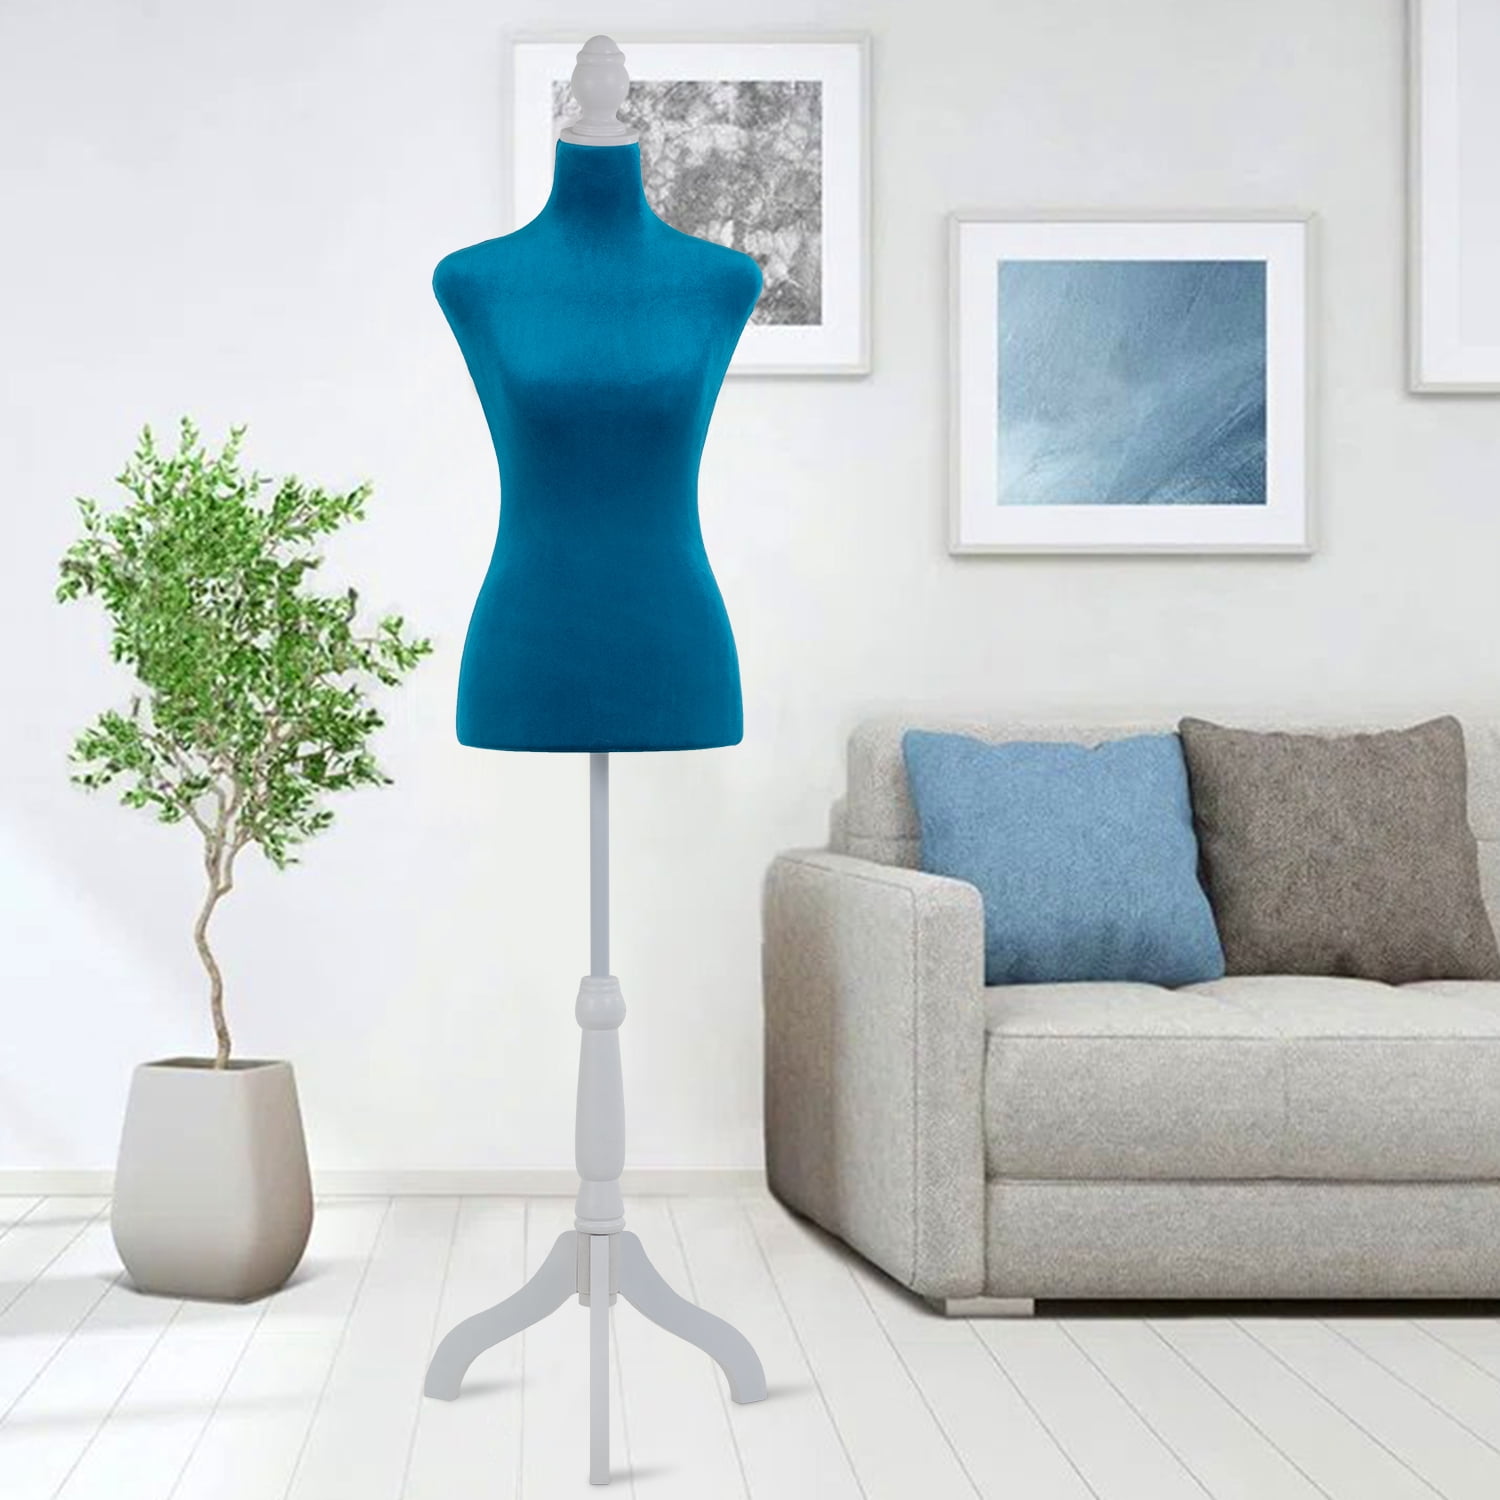 Mannequin Body, Mannequin Torso Mannequin Stand Dress Form 49.6-63.4 Height  Adjustable Maniquins Body Female, Portable Displays Women for Sewing